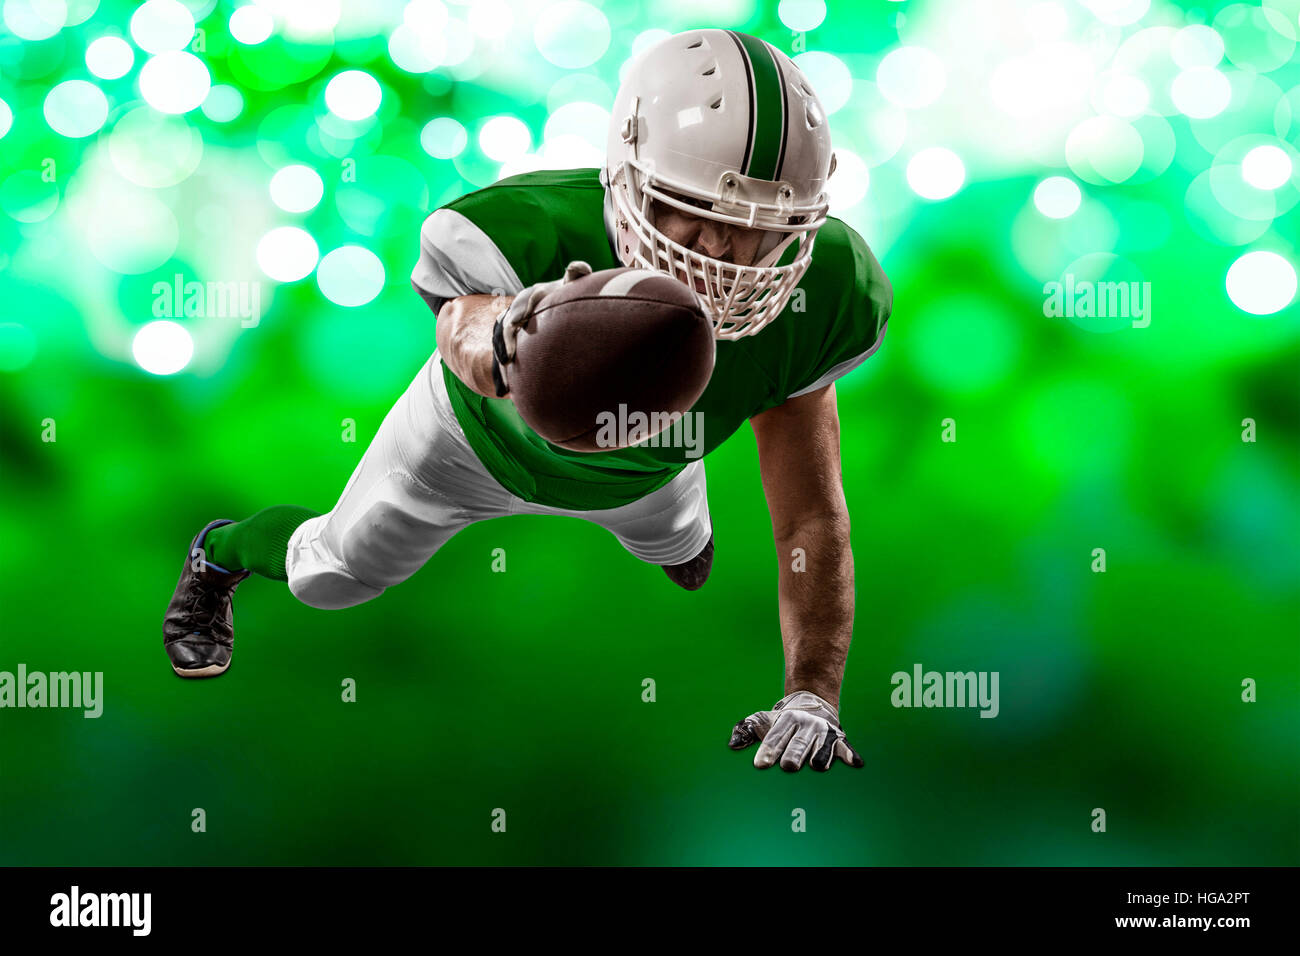 Football Player with a green uniform scoring on a green lights background. Stock Photo